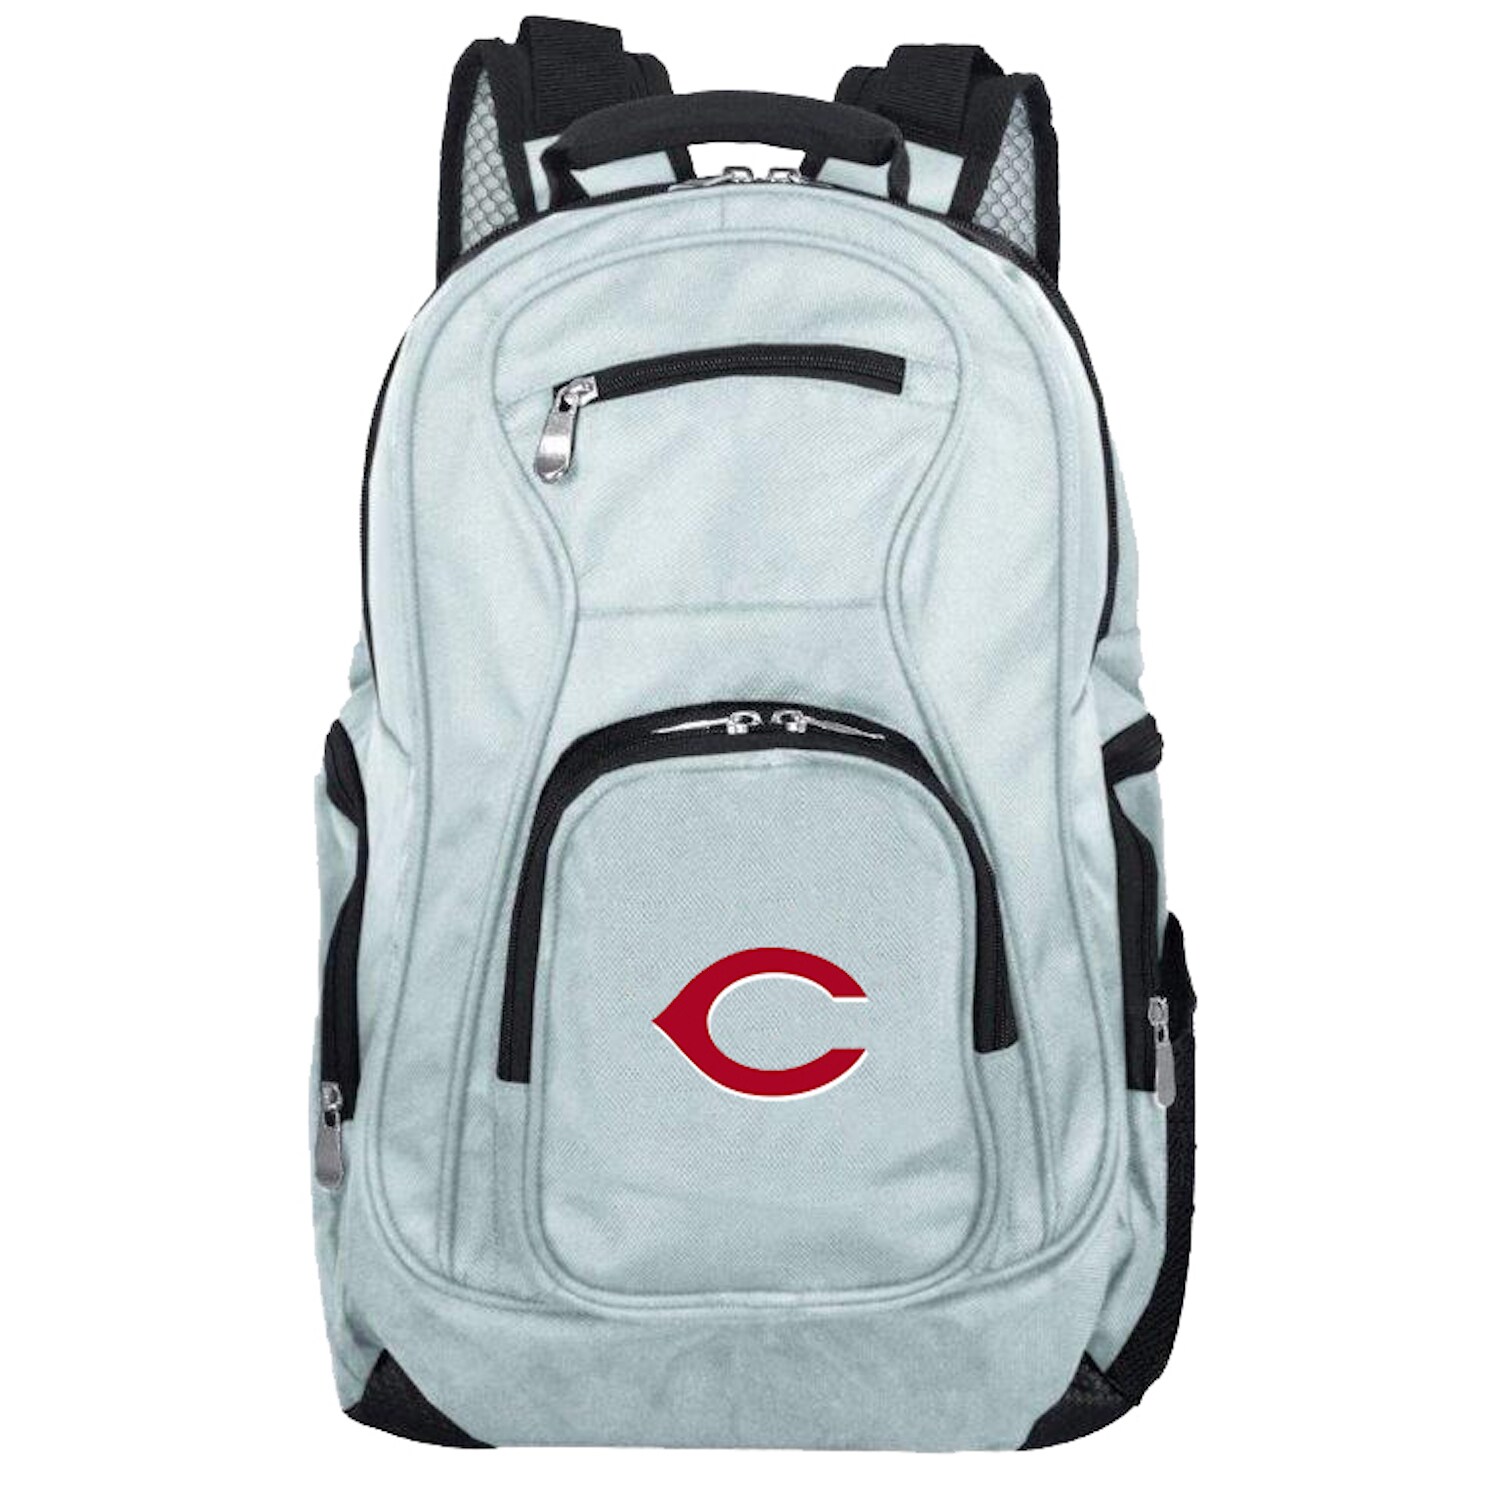 MLB St Louis Cardinals Premium Laptop Backpack with Colored Trim